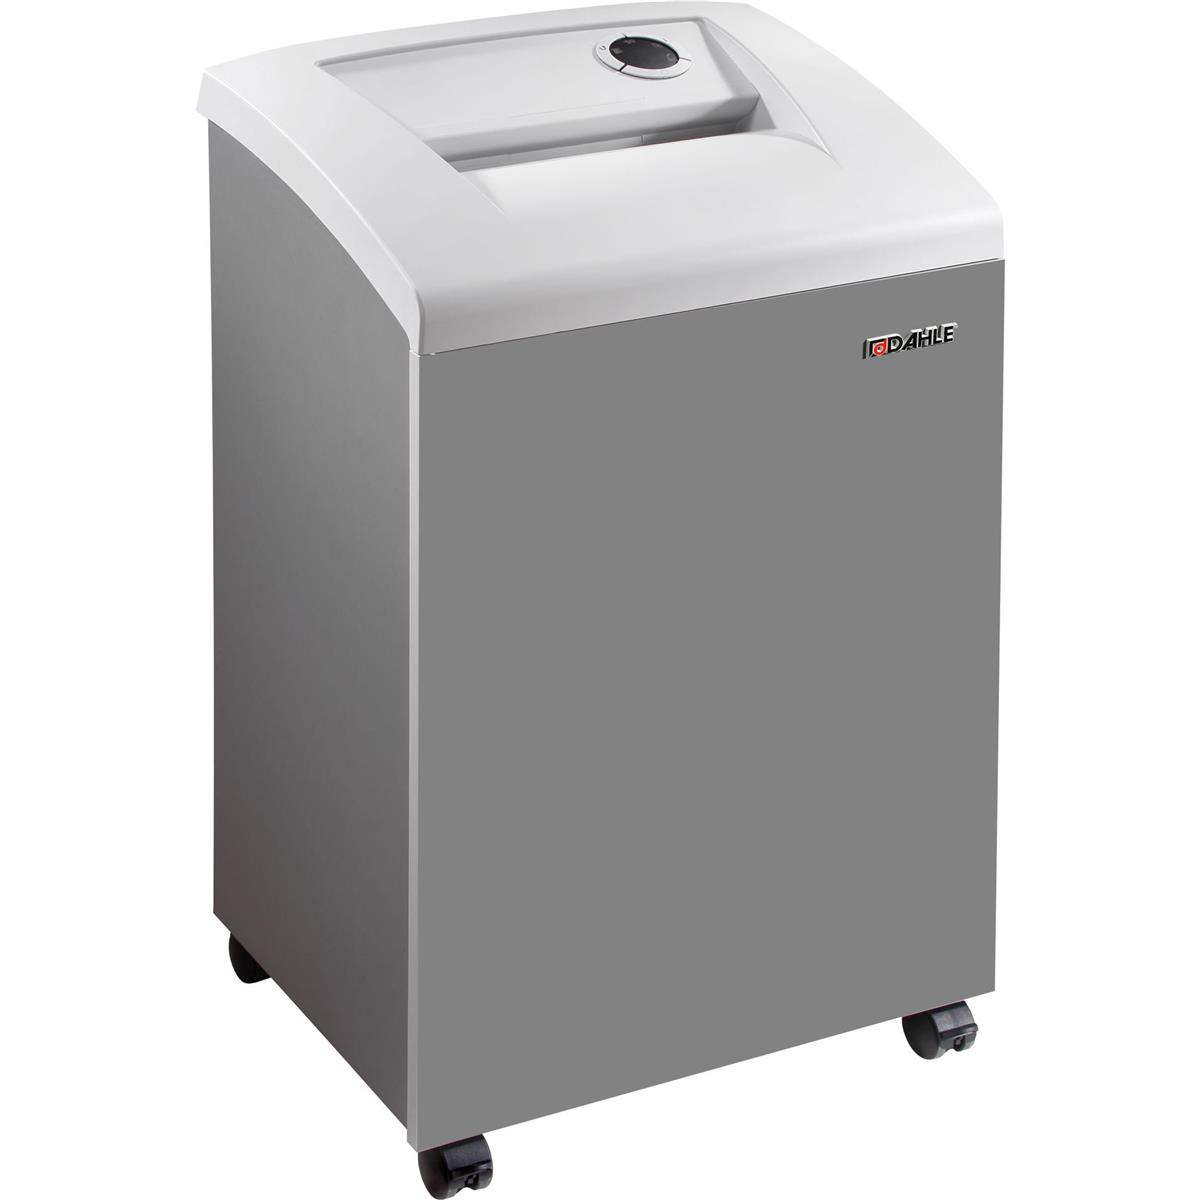 Image of Dahle CleanTEC Oil-Free Office Shredder